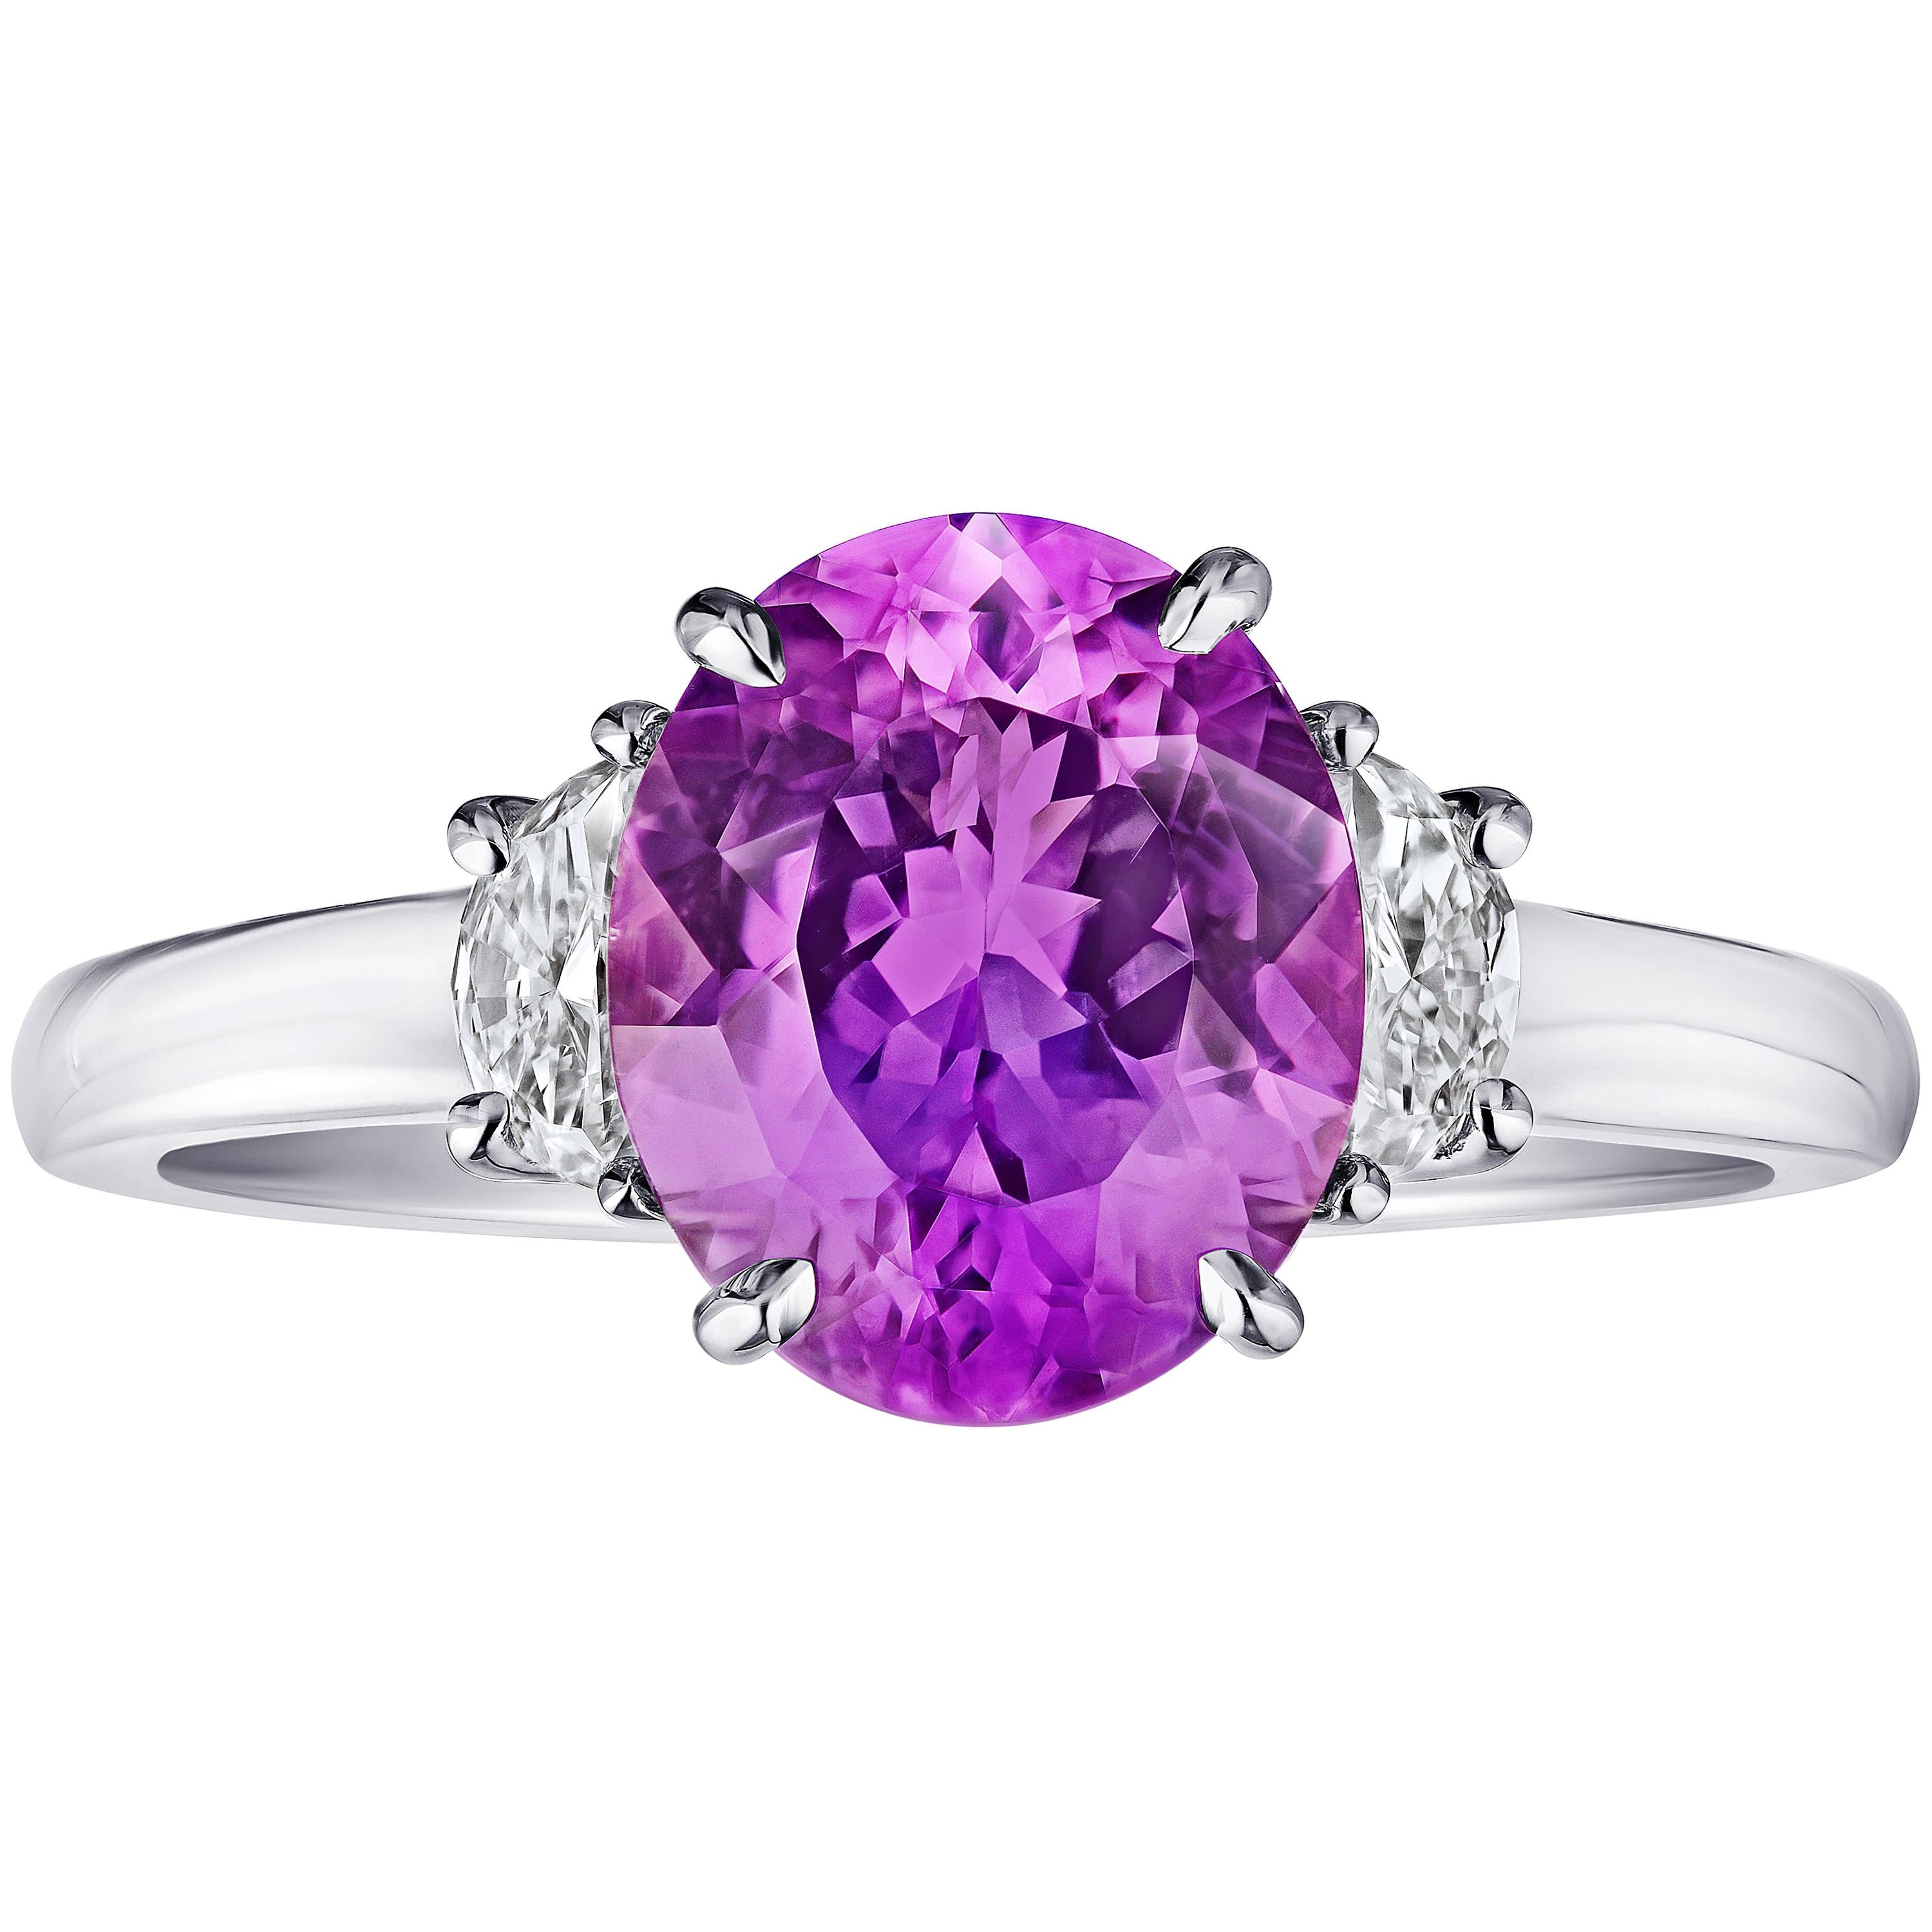 3.21 Carat Oval Pink Sapphire and Diamond Ring For Sale